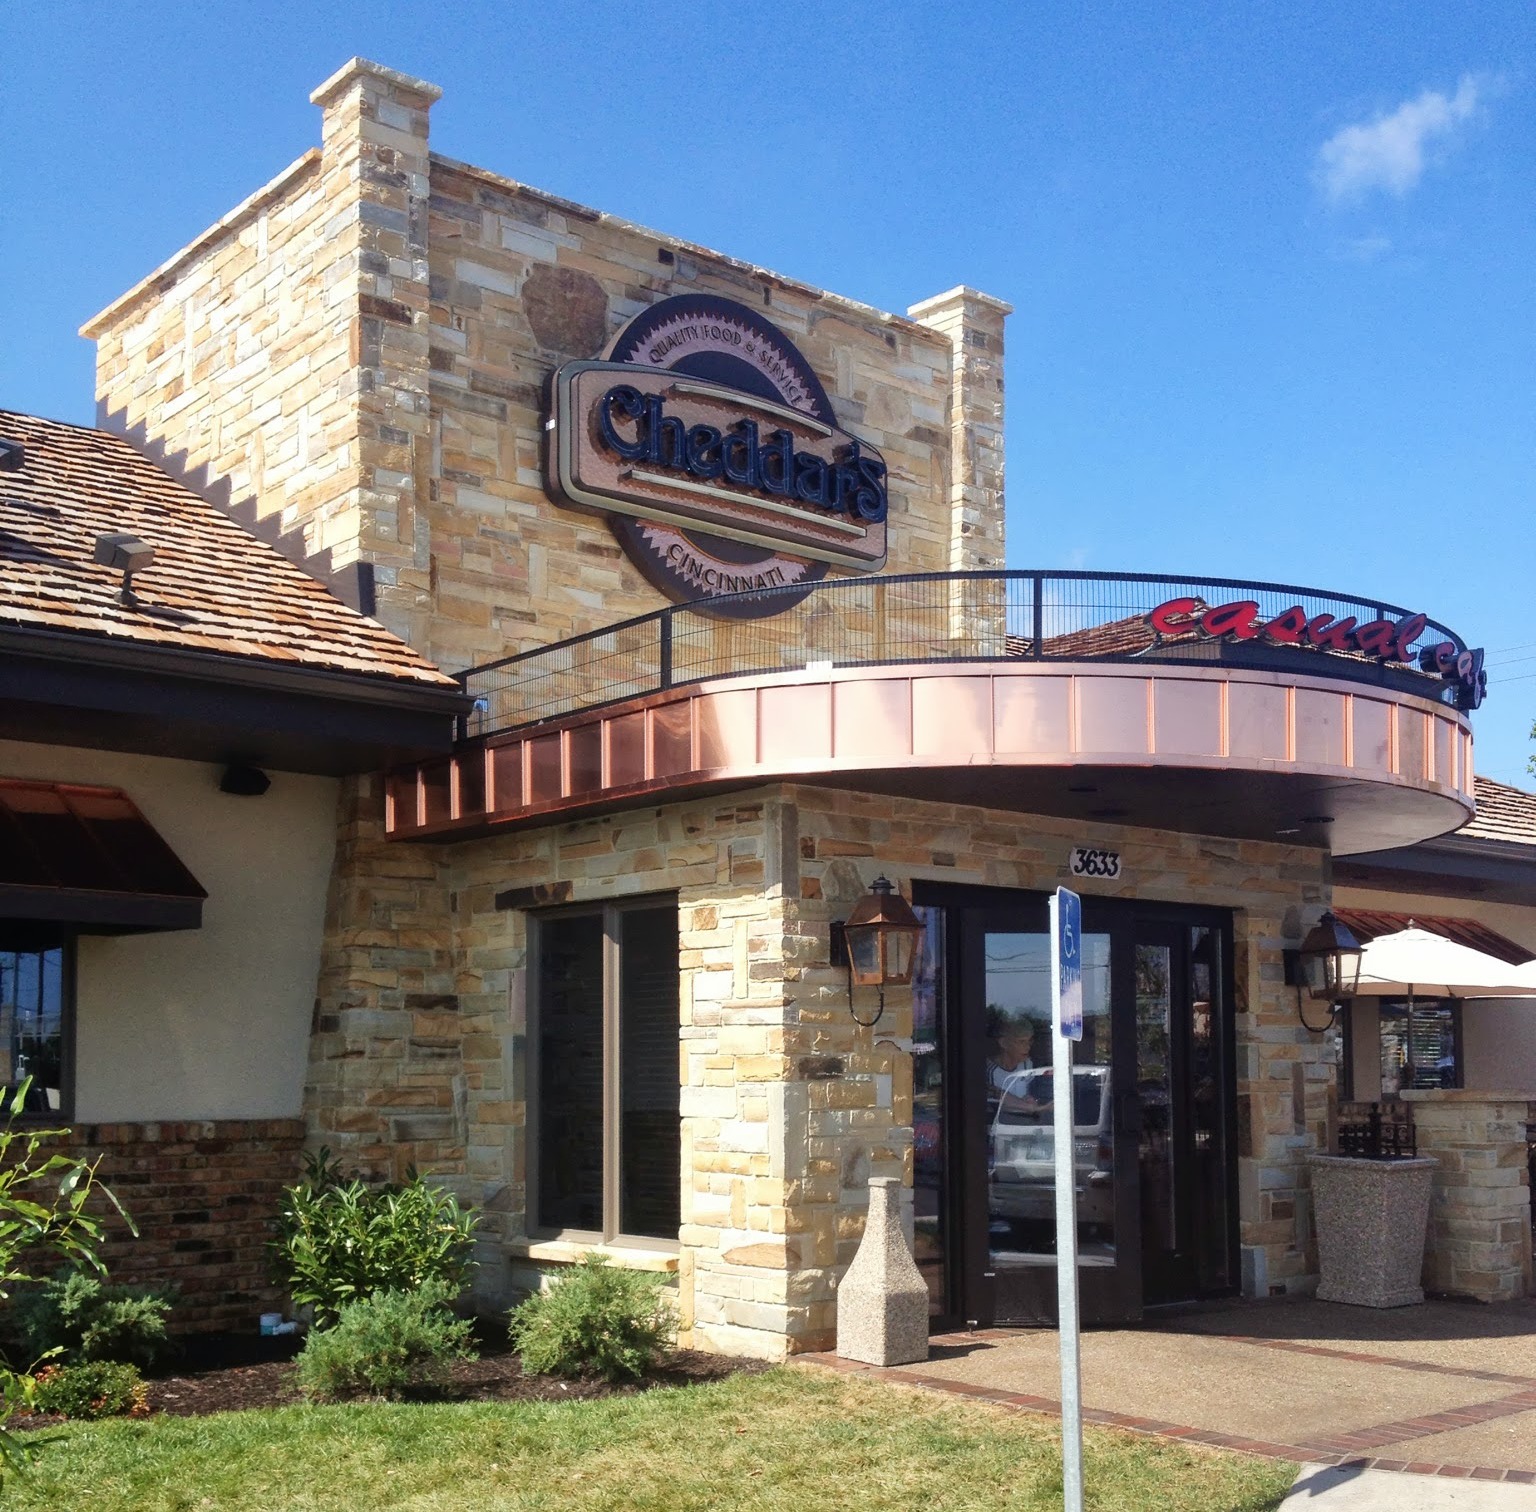 Restaurant Review: Cheddar's Casual Cafe | The Food Hussy!